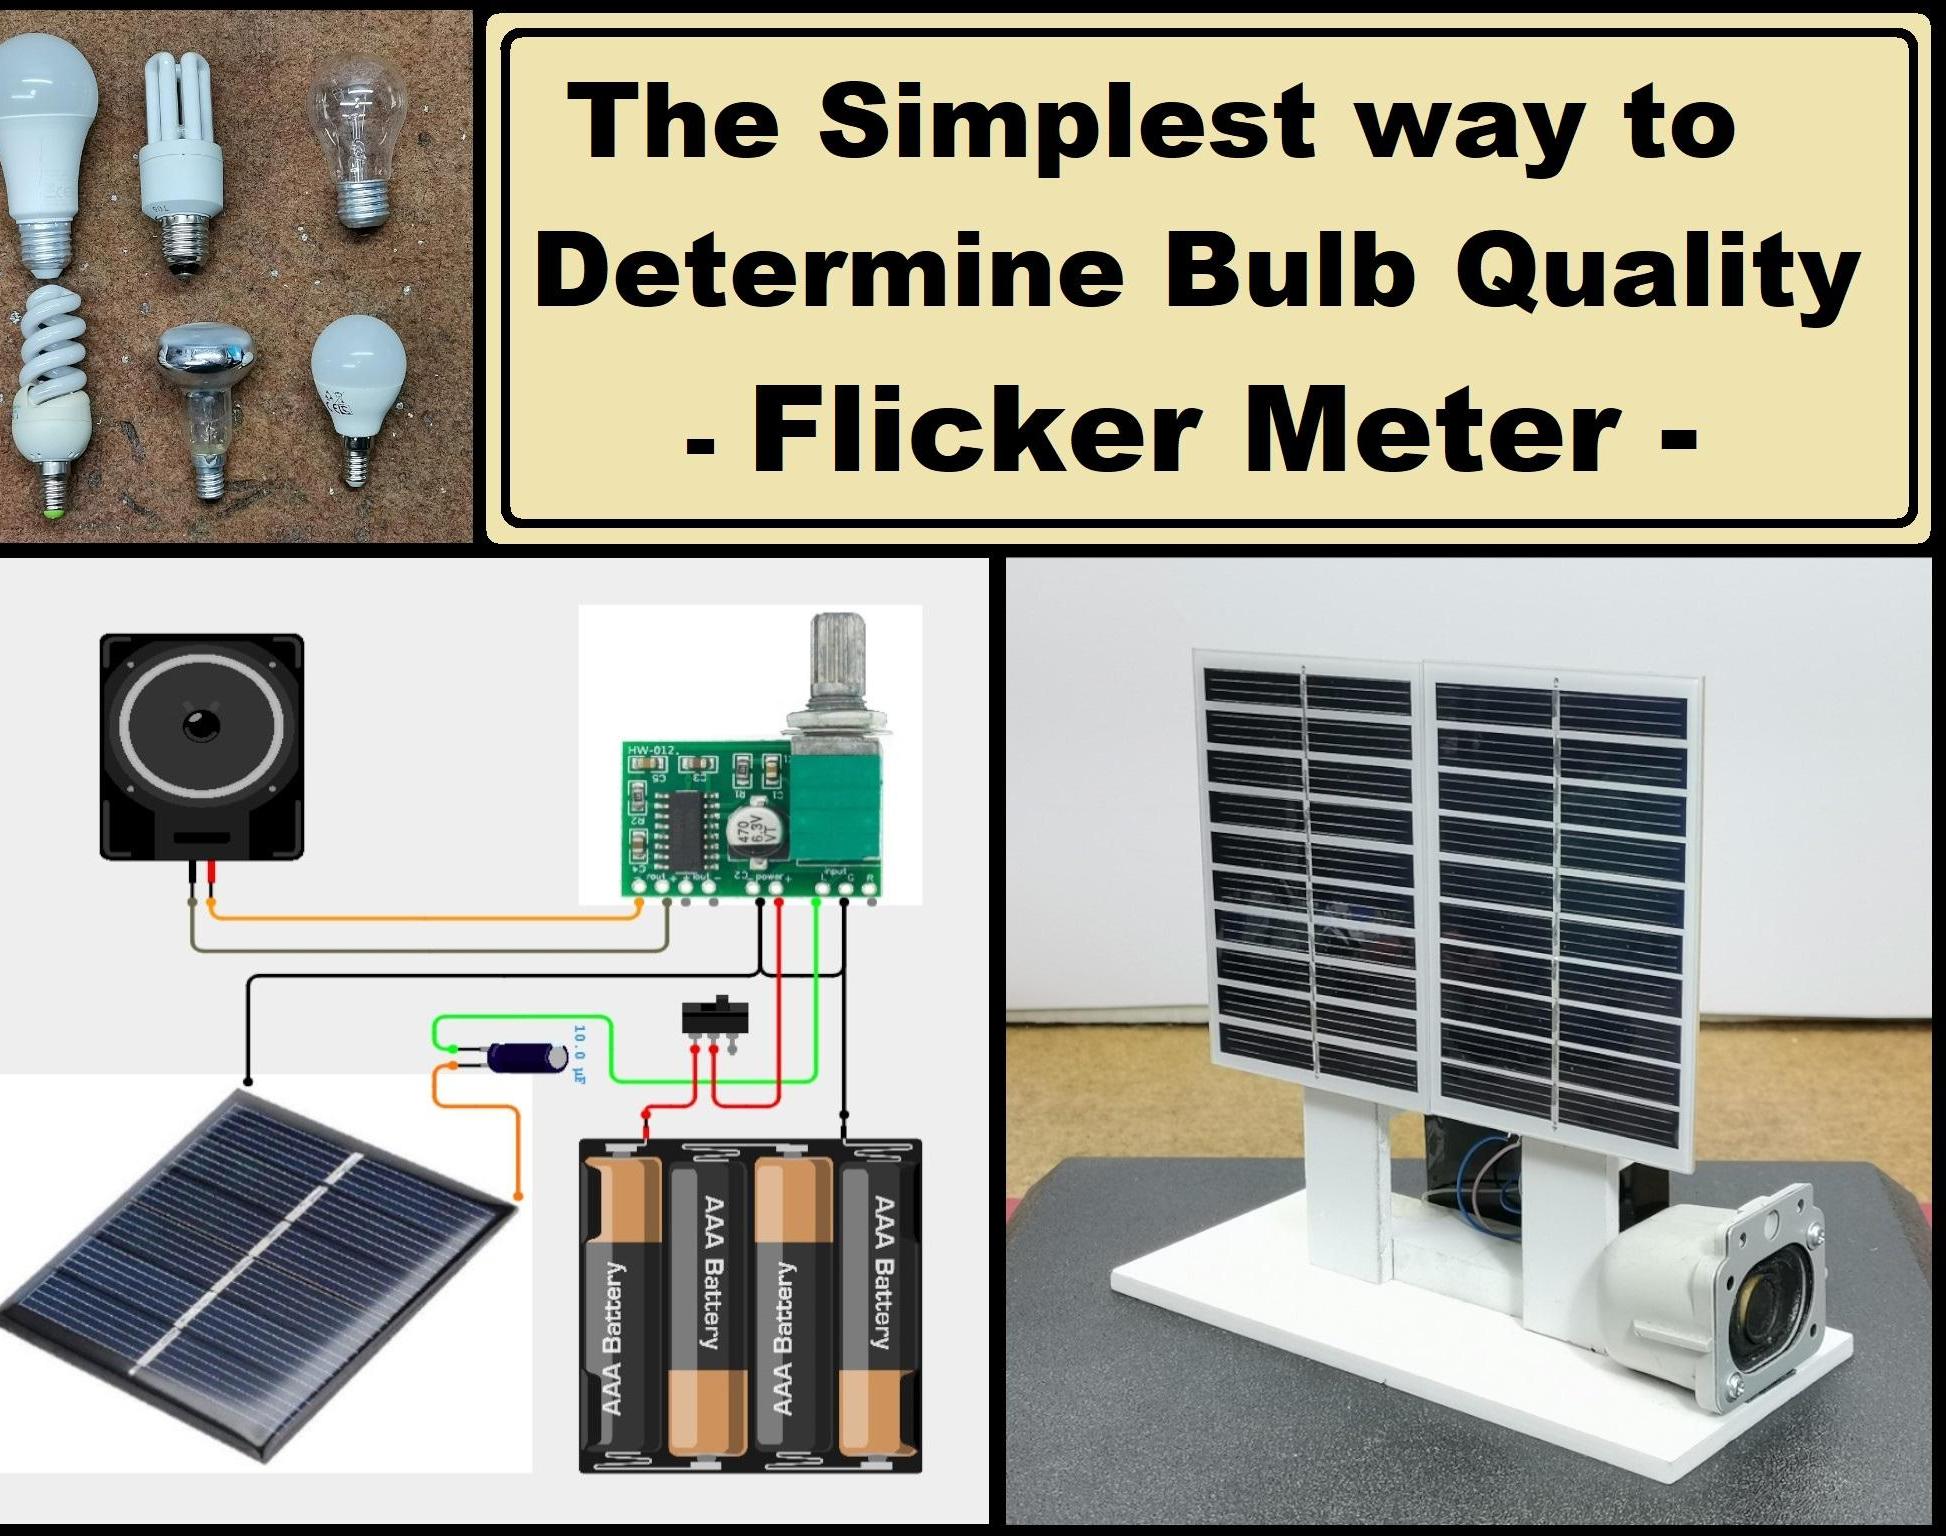 The Simplest Way to Determine the Quality of Lighting in Your Home - Bulb Flickering Meter